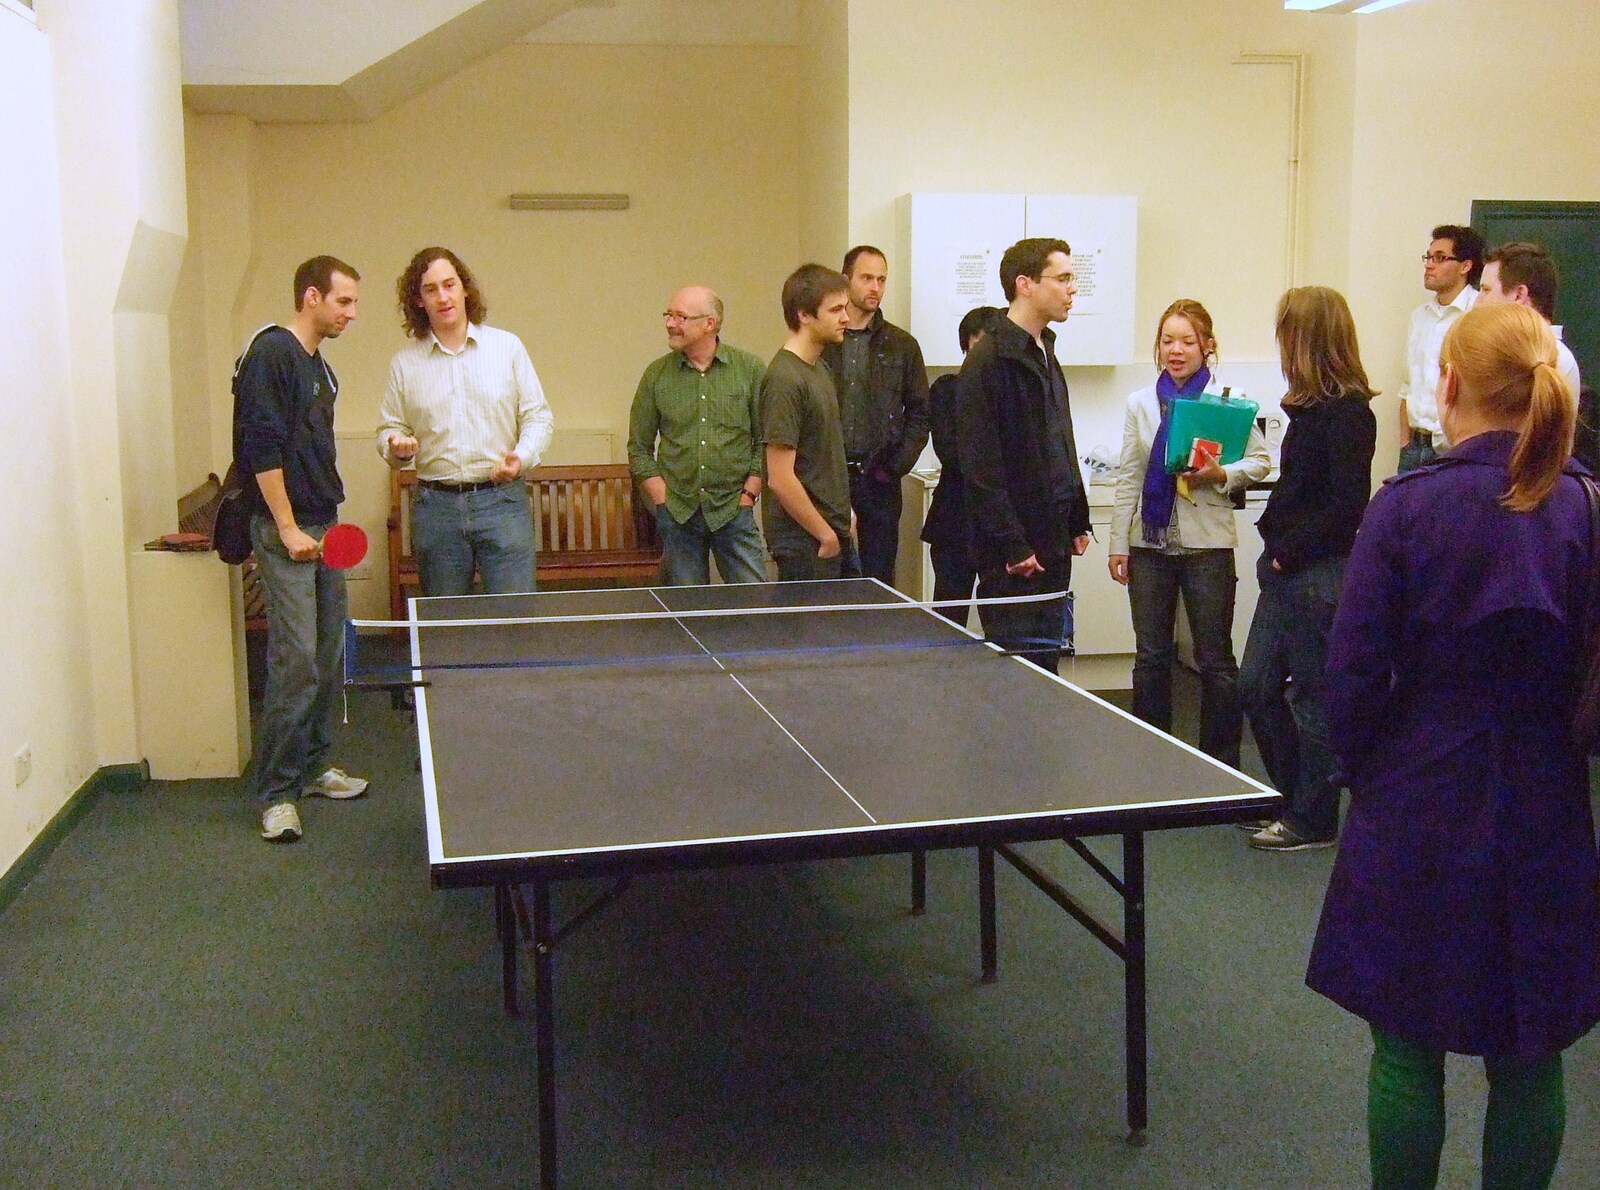 The table-tennis table from TouchType Moves Offices and a Night in The Kings Head, Brockdish and London - 19th October 2011